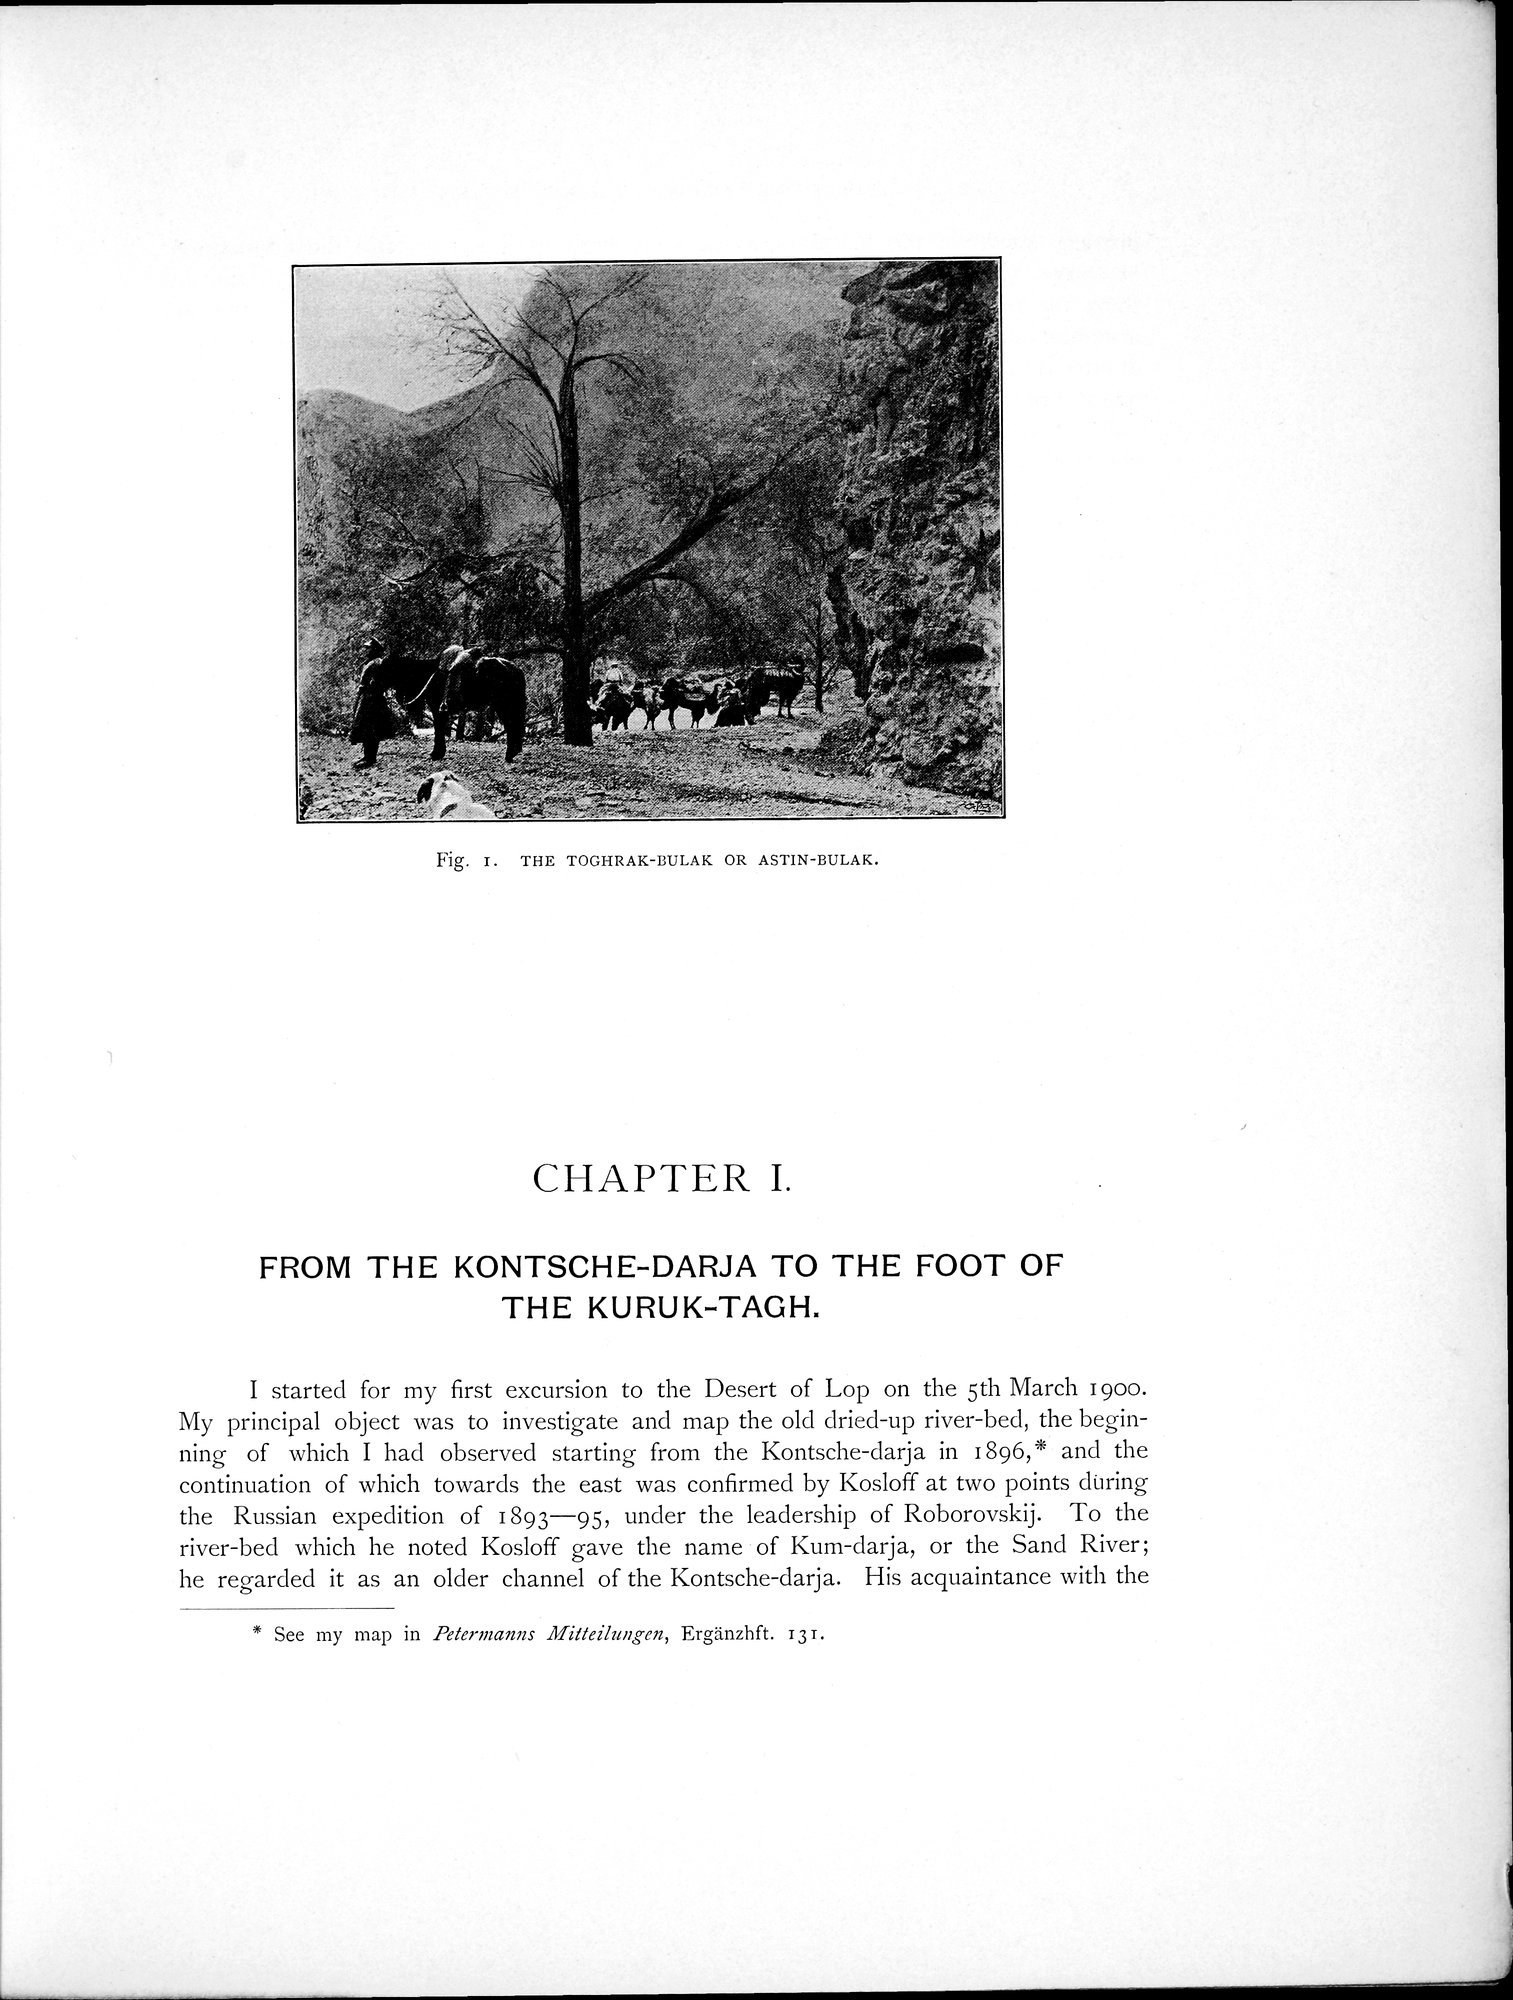 Scientific Results of a Journey in Central Asia, 1899-1902 : vol.2 / 15 ページ（白黒高解像度画像）